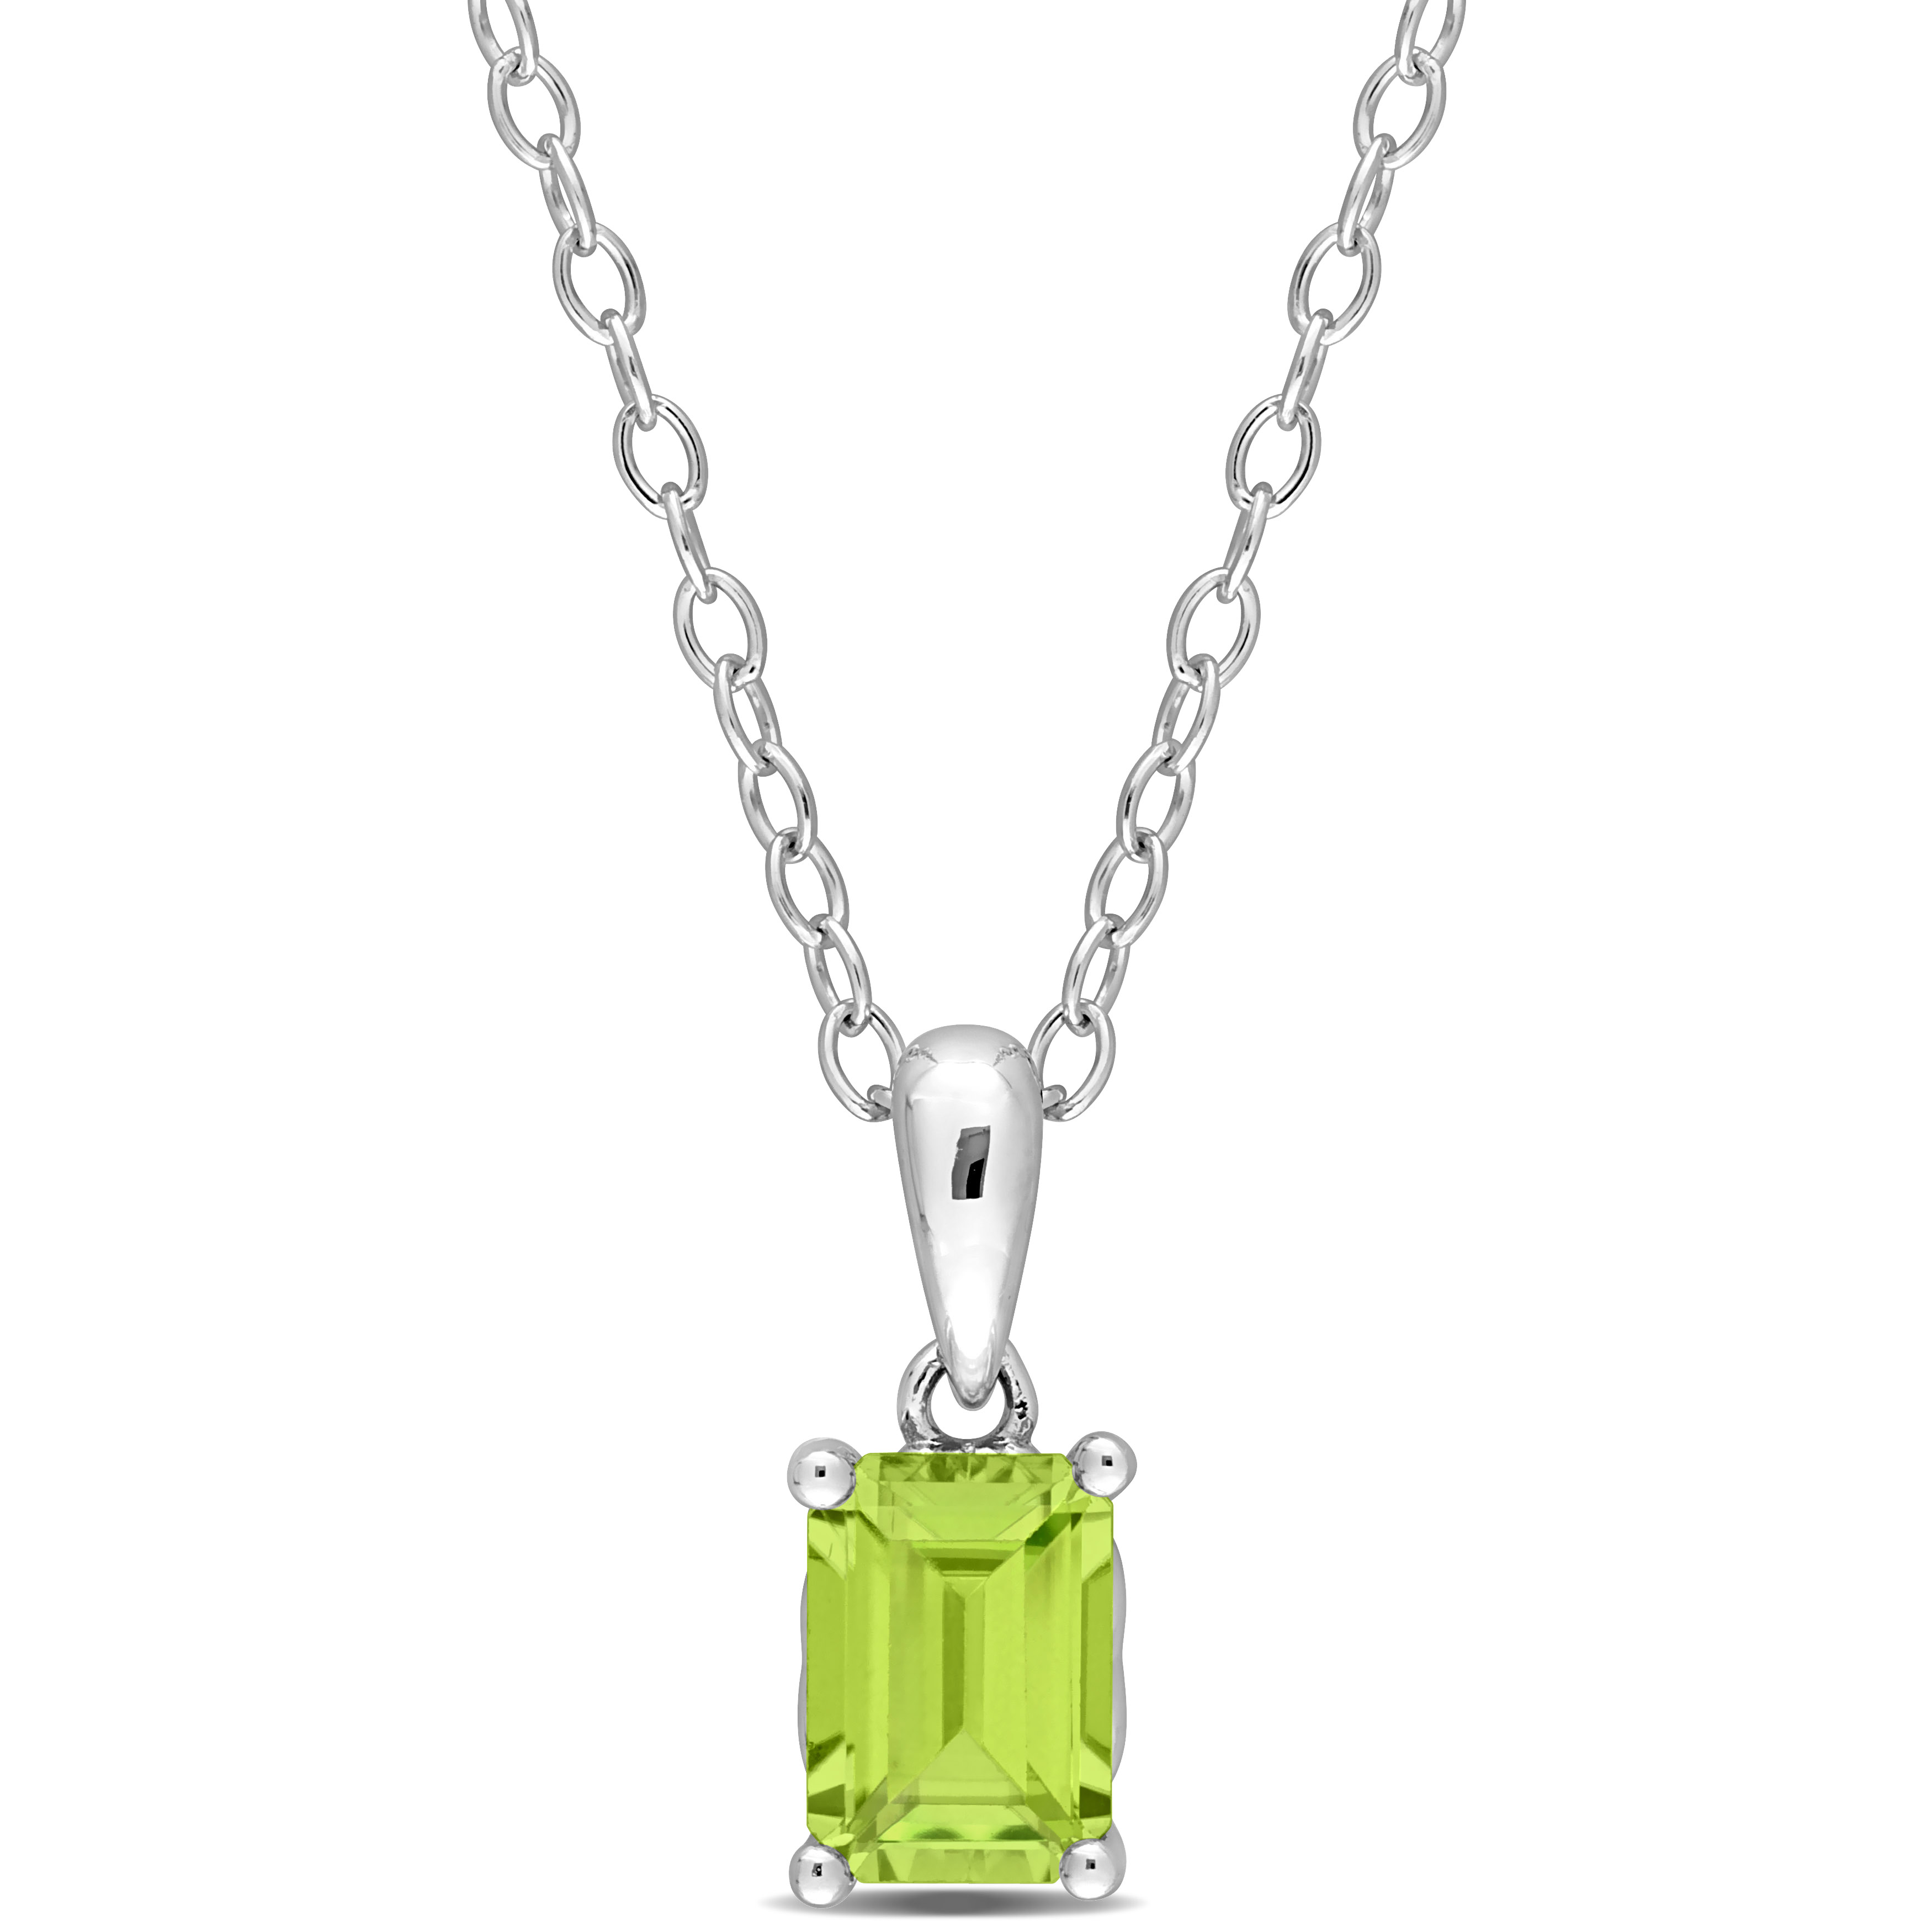 1 CT TGW Emerald Cut Peridot Solitaire Heart Design Pendant with Chain in Sterling Silver - 18 in.